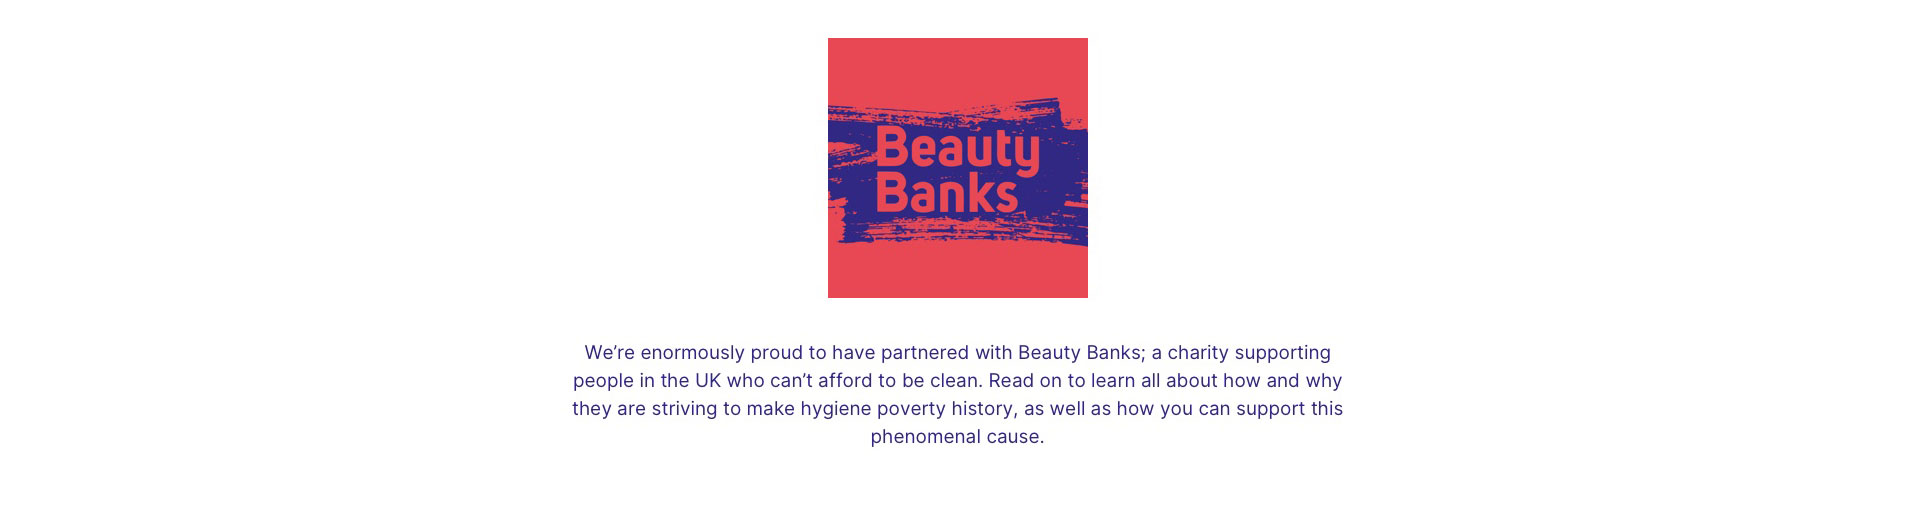 Beauty banks. We're enormously proud to have partnered with Beauty Banks; a charity supporting people in the UK who can't afford to be clean. Read on to learn all about how and why they are striving to make hygiene poverty history, as well as how you can support this phenomenal cause.